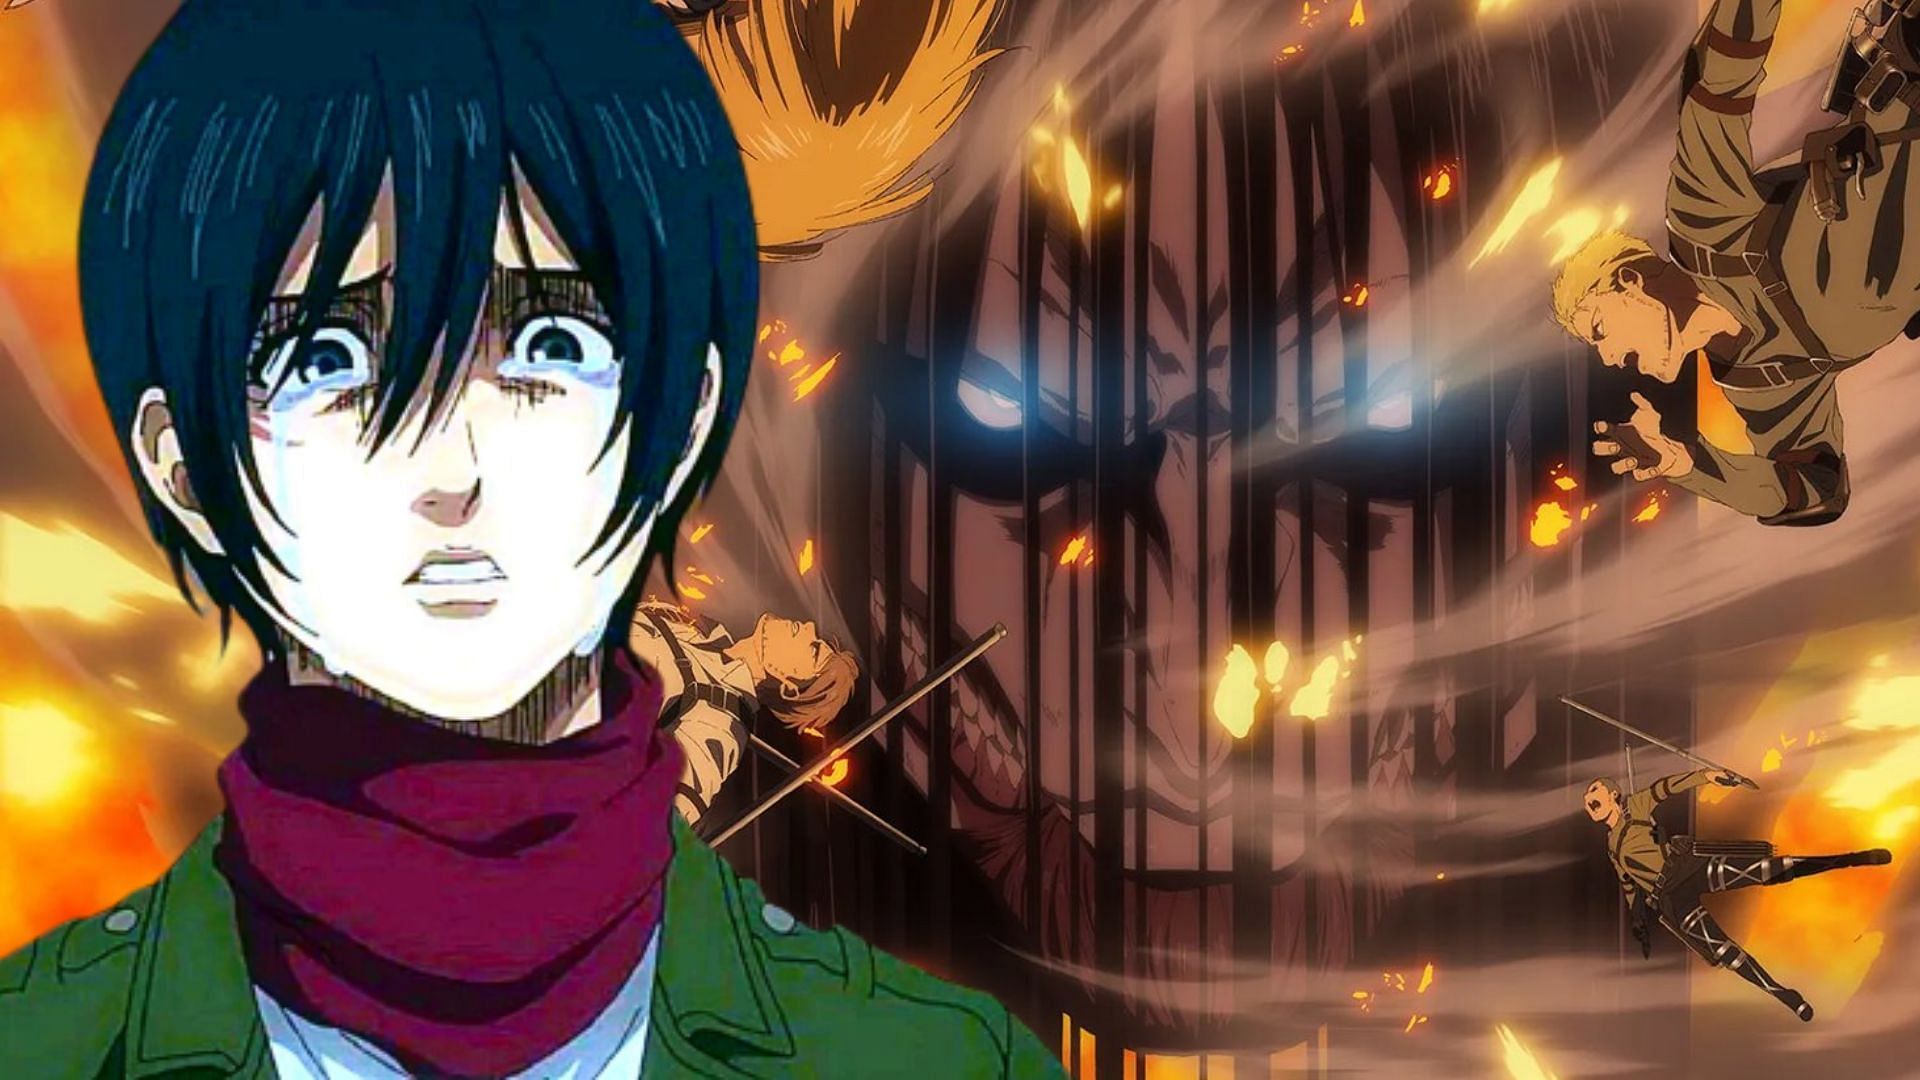 Attack on Titan Director Shares MAPPA's Biggest Difference From WIT Studio